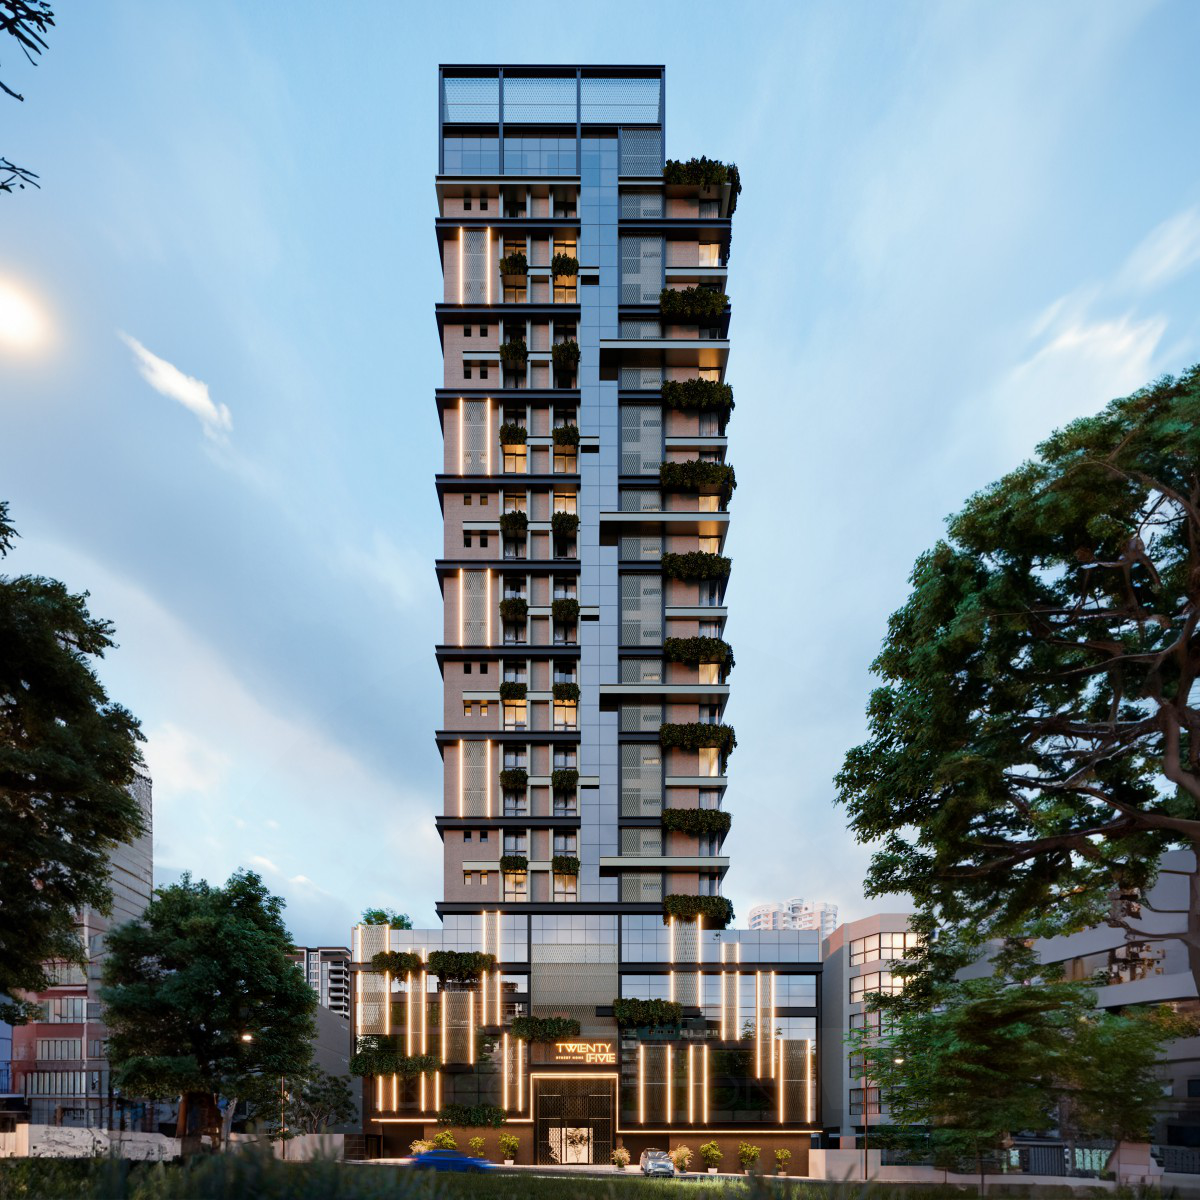 Daniel de Amorim wins Silver at the prestigious A' Architecture, Building and Structure Design Award with Twenty Five Street Home Residential and Commercial Building.